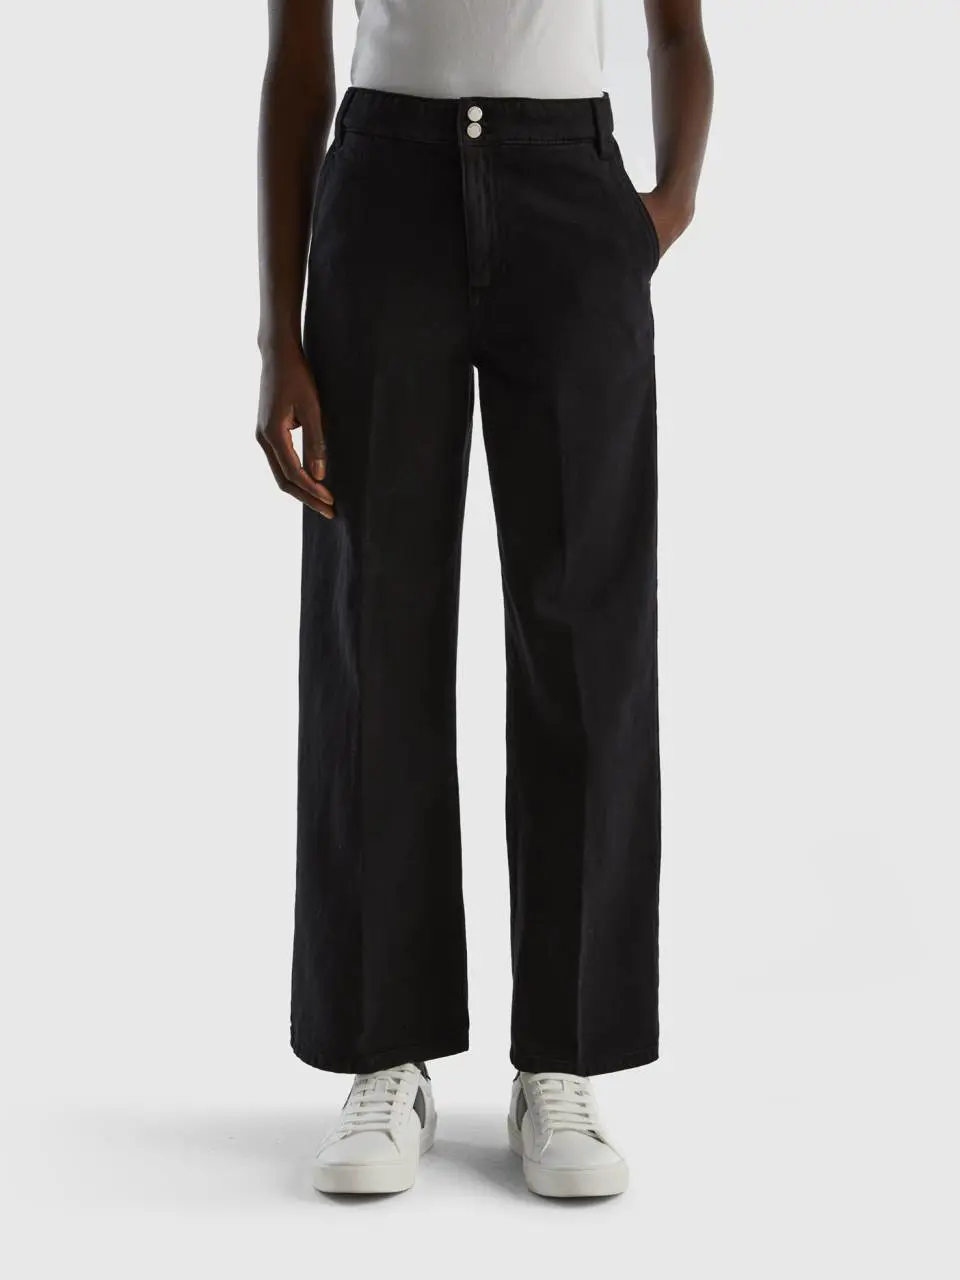 Benetton high-waisted trousers with wide leg. 1